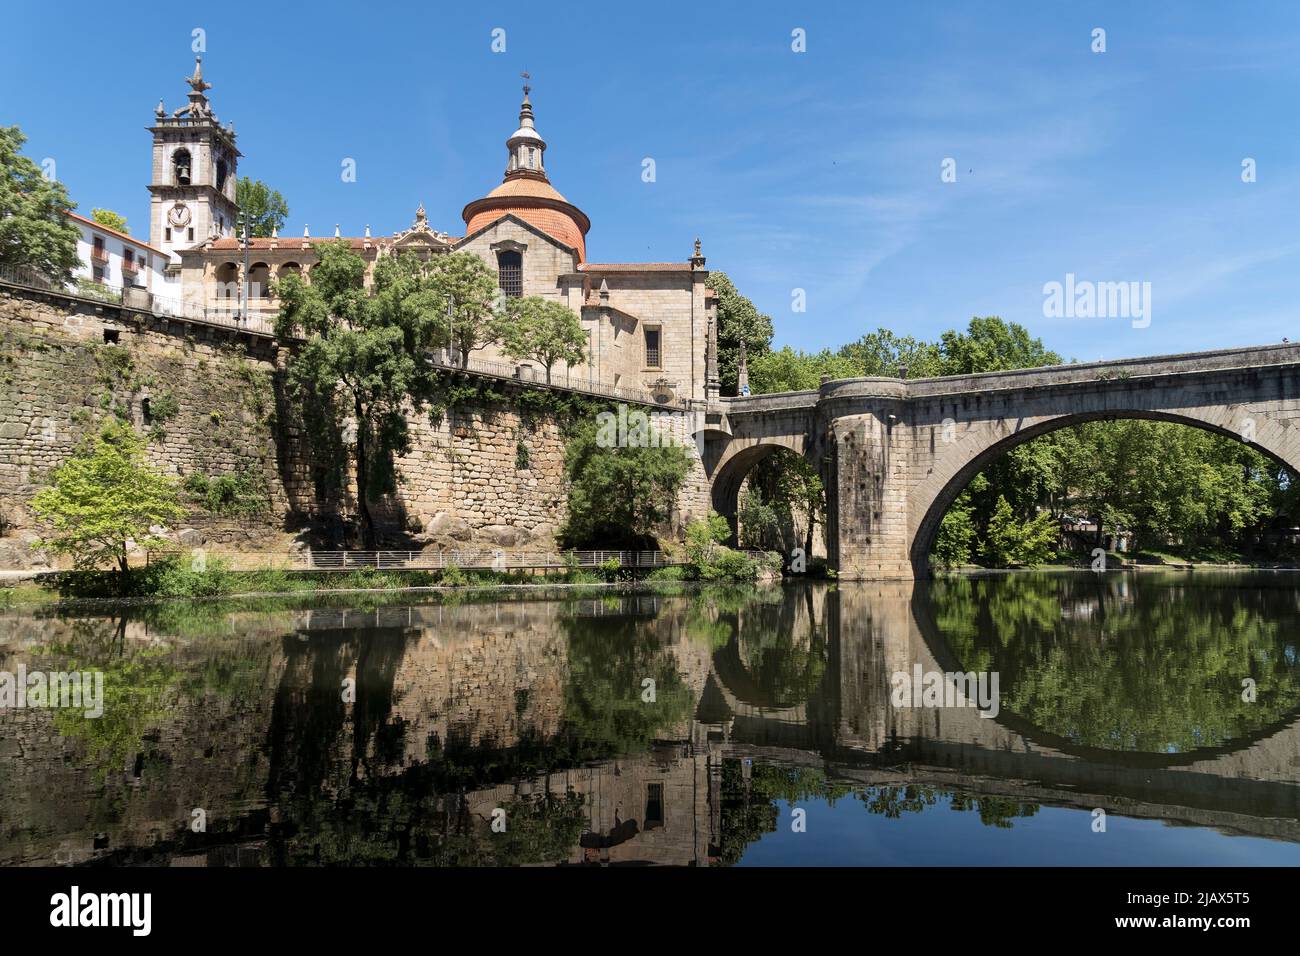 View of Amarante historic city in Portugal with the St. Goncalo church on Tamega River and Sao Goncalo bidge Stock Photo